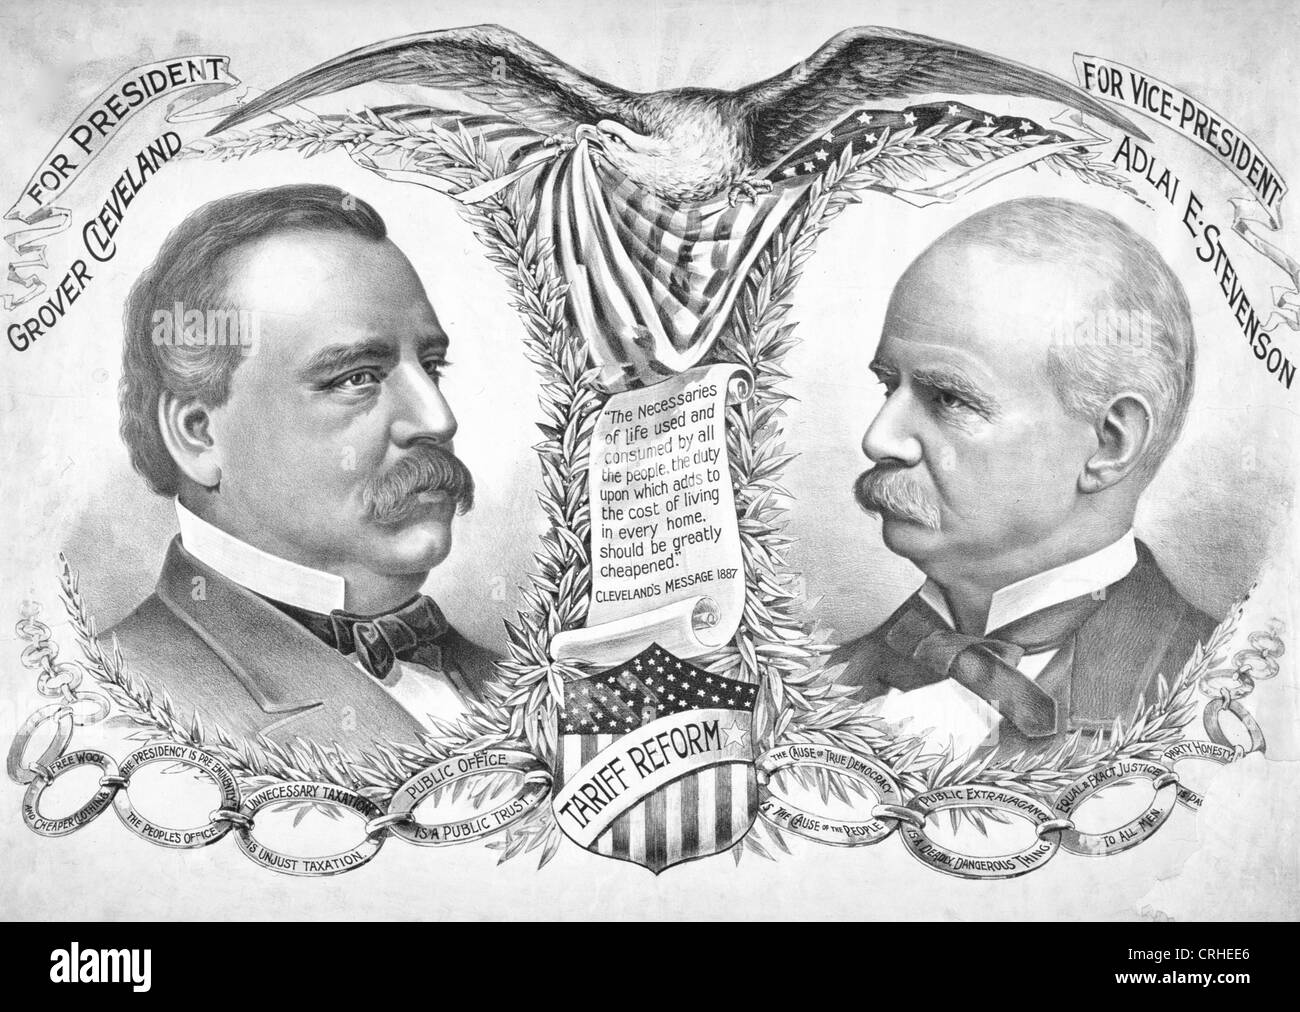 Grover Cleveland for President - Adlai Stevenson for Vice President - Campaign ad in USA Presidential election of 1892 Stock Photo